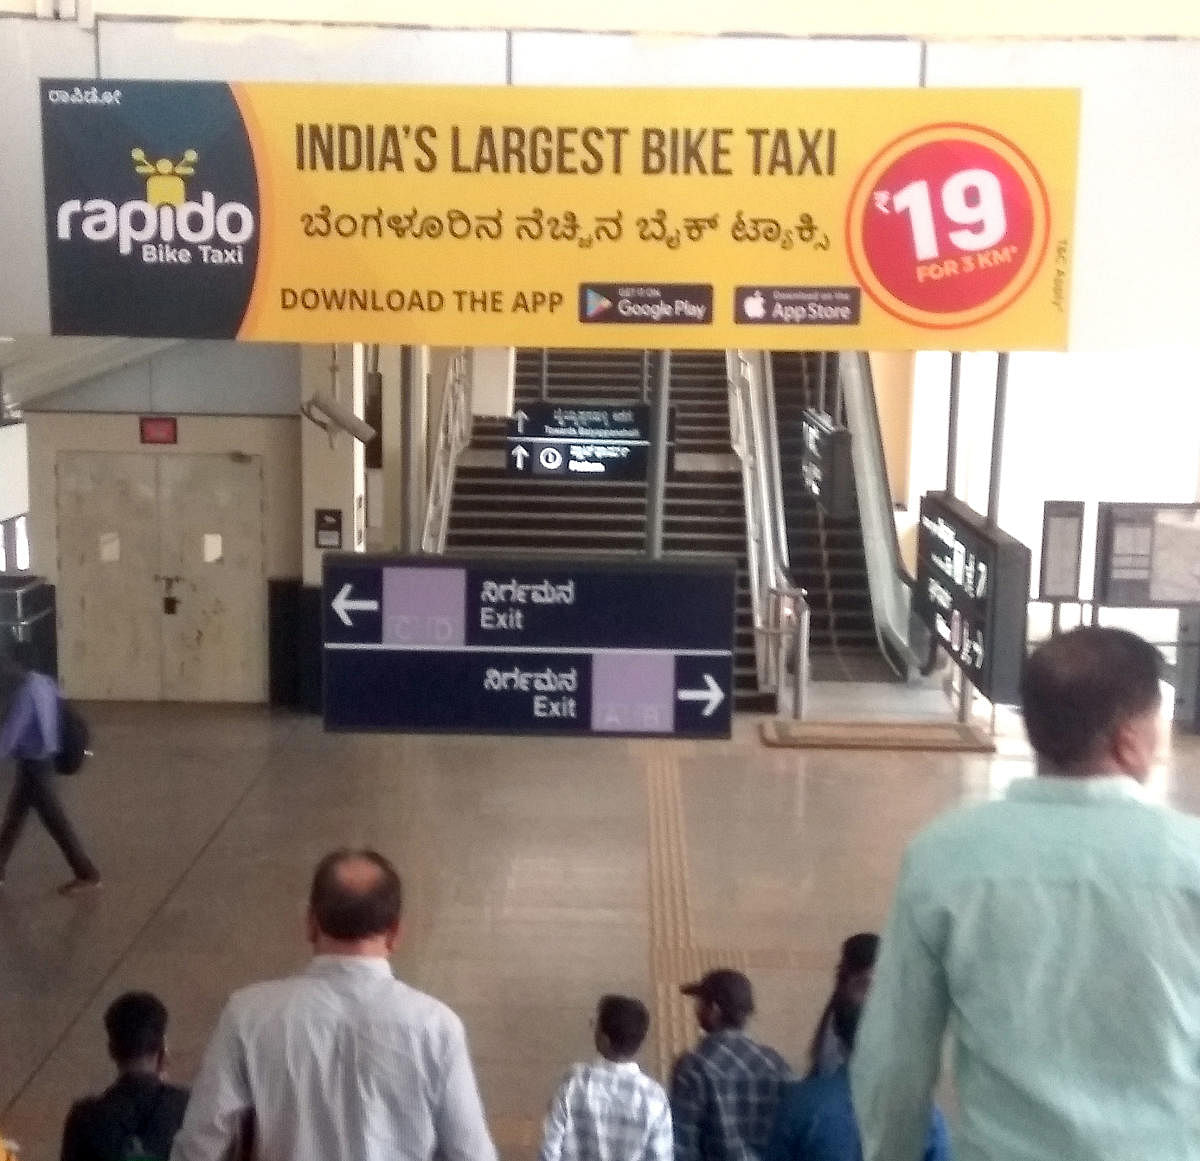 While the government has consistently maintained a ban on bike taxis, it has not prevented Rapido from displaying advertisements in prime places like metro stations. Picture from MG Road metro station.